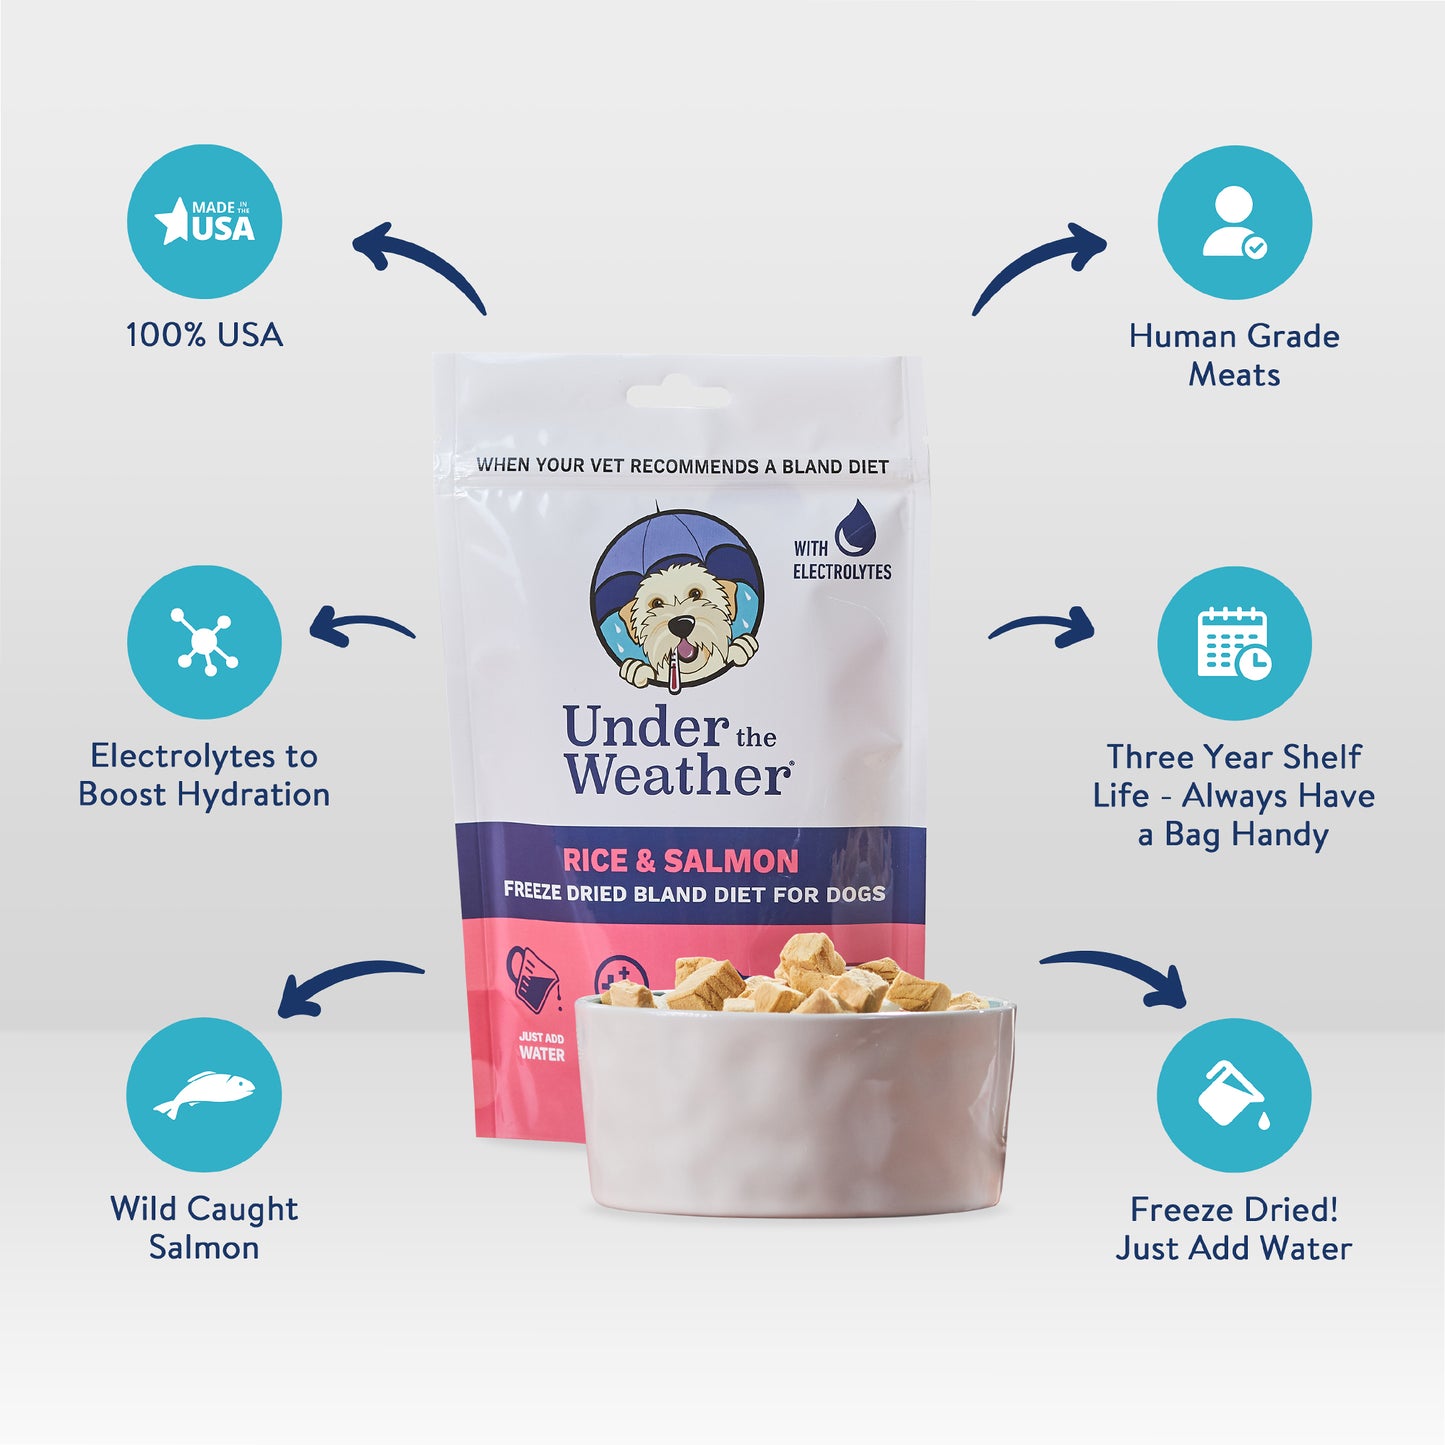 Salmon & Rice Bland Diet For Dogs - 6 pack